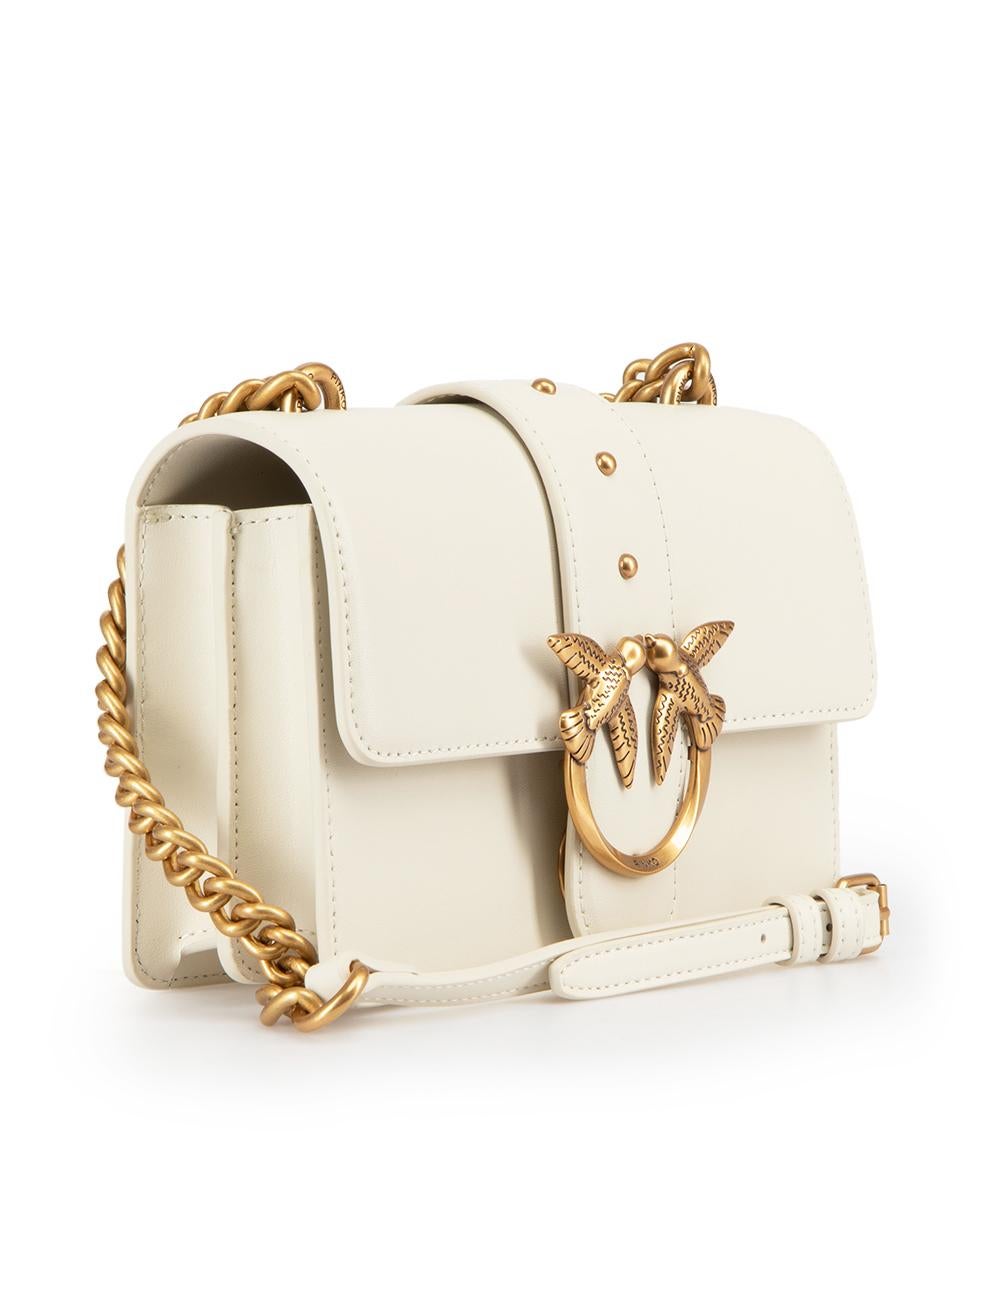 CONDITION is New with tags on this brand new Pinko designer item. This item comes with original packaging.
 
 
 
 Details
 
 
 Love One Mini
 
 White
 
 Leather
 
 Mini crossbody bag
 
 Gold tone hardware
 
 Lovebirds buckle hardware
 
 Chain and